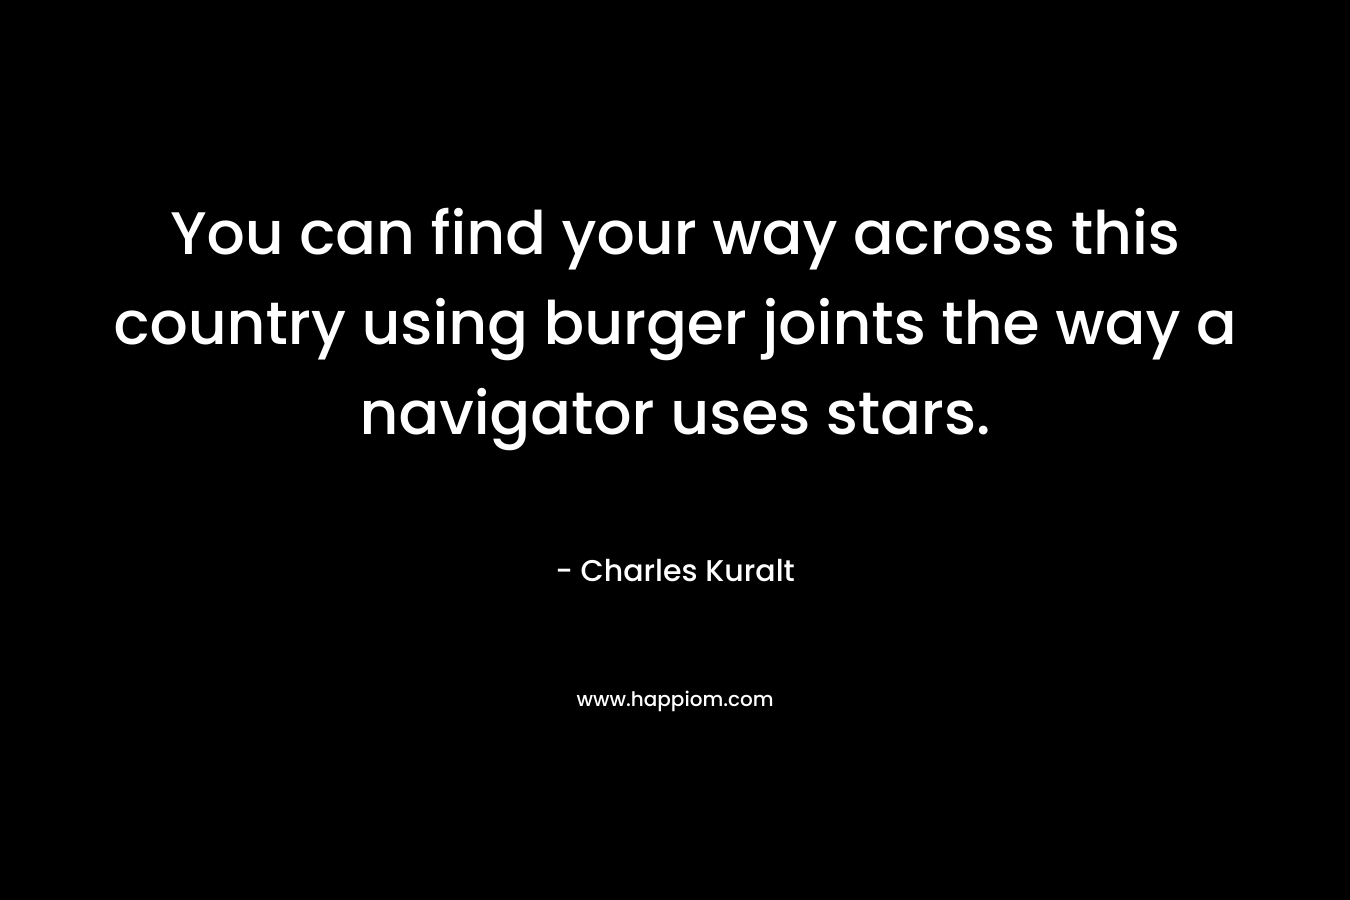 You can find your way across this country using burger joints the way a navigator uses stars. – Charles Kuralt